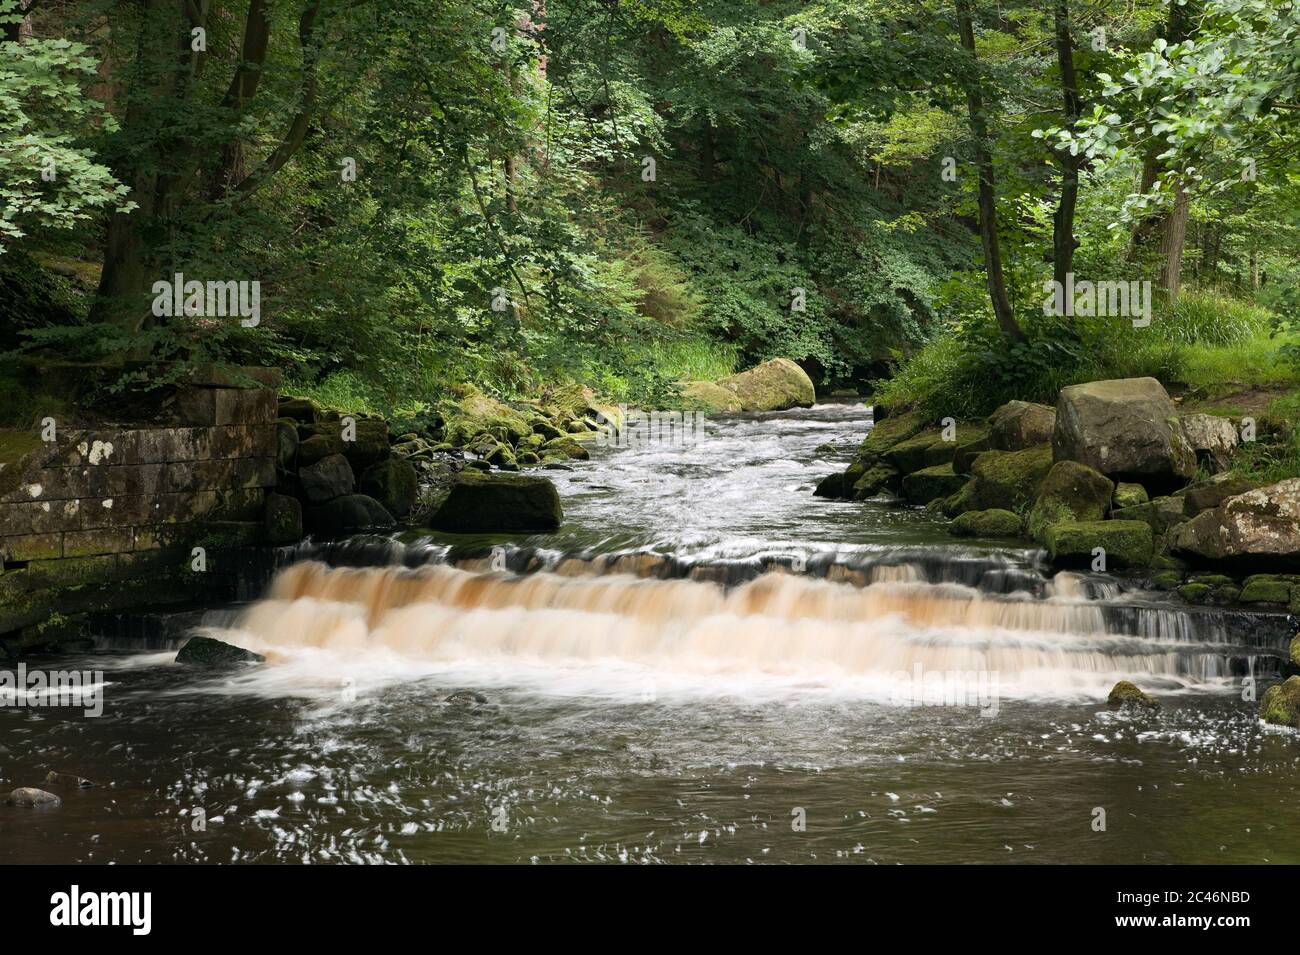 Weir in the River Washburn, Yorkshire, UK Stock Photo